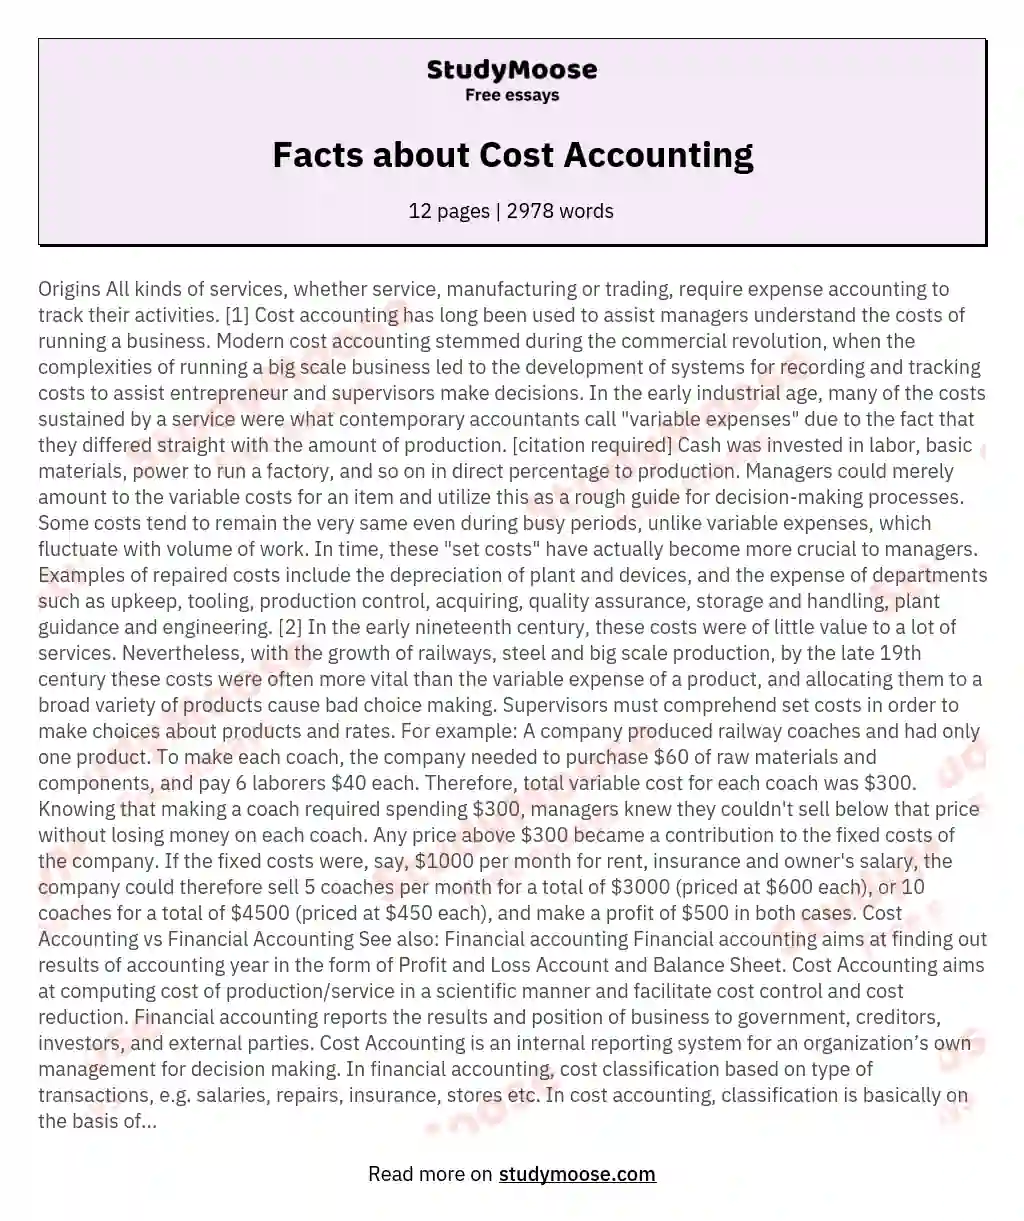 Facts about Cost Accounting essay